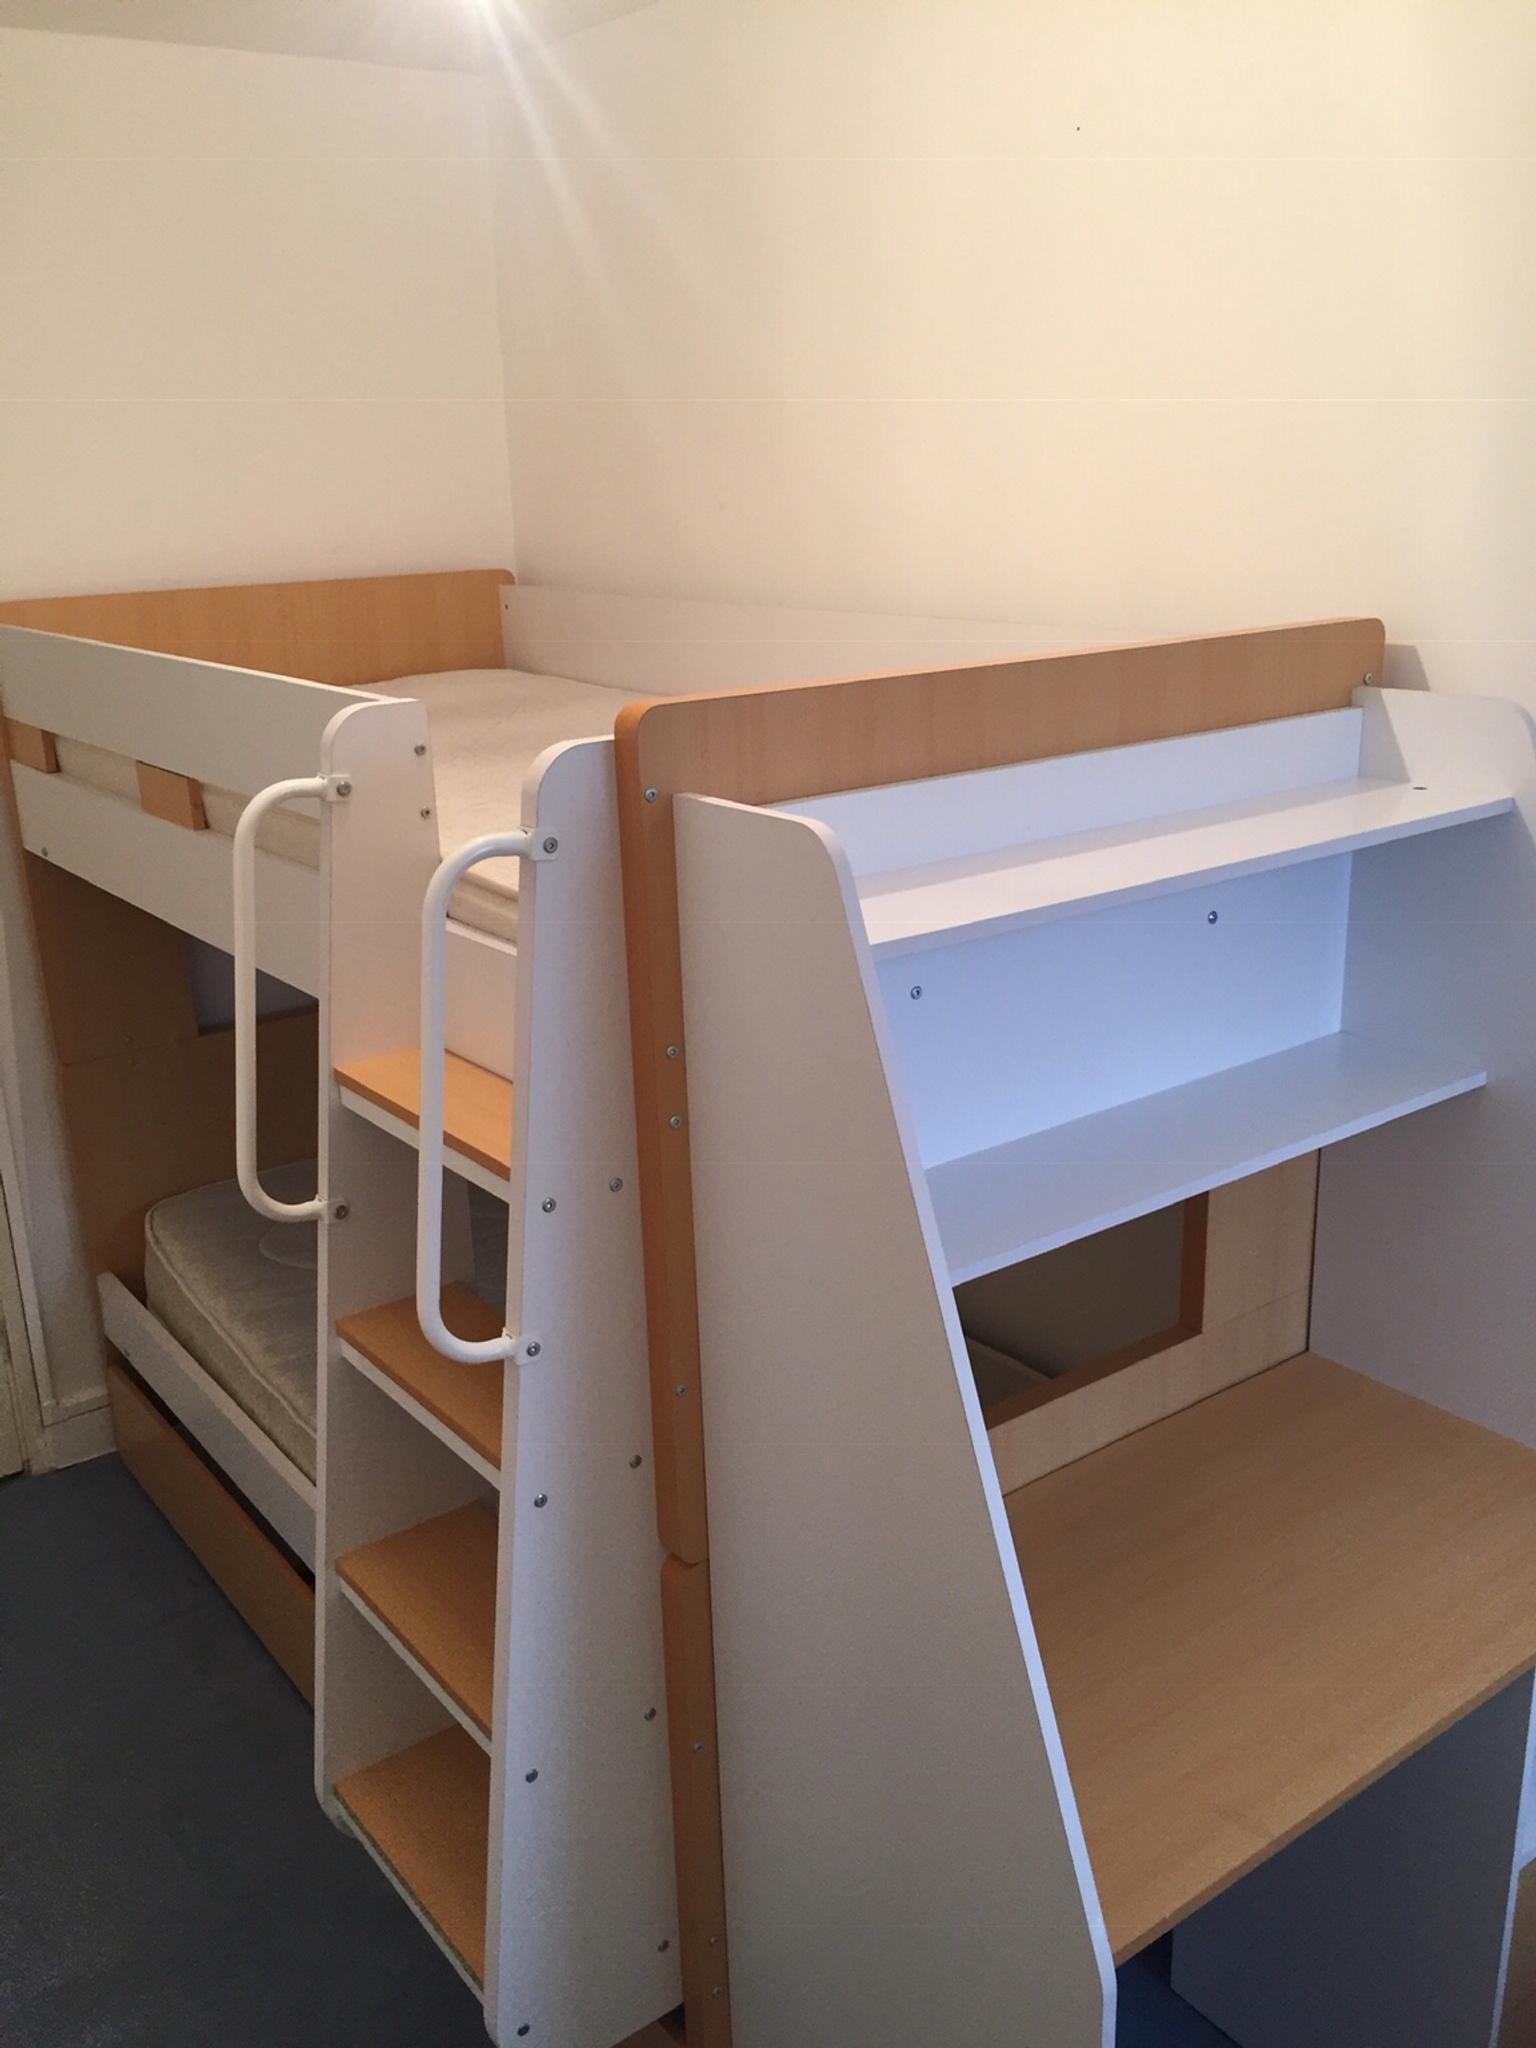 Olympic Bunk Beds With Desk And Guest Bed In E9 London Fur 350 00